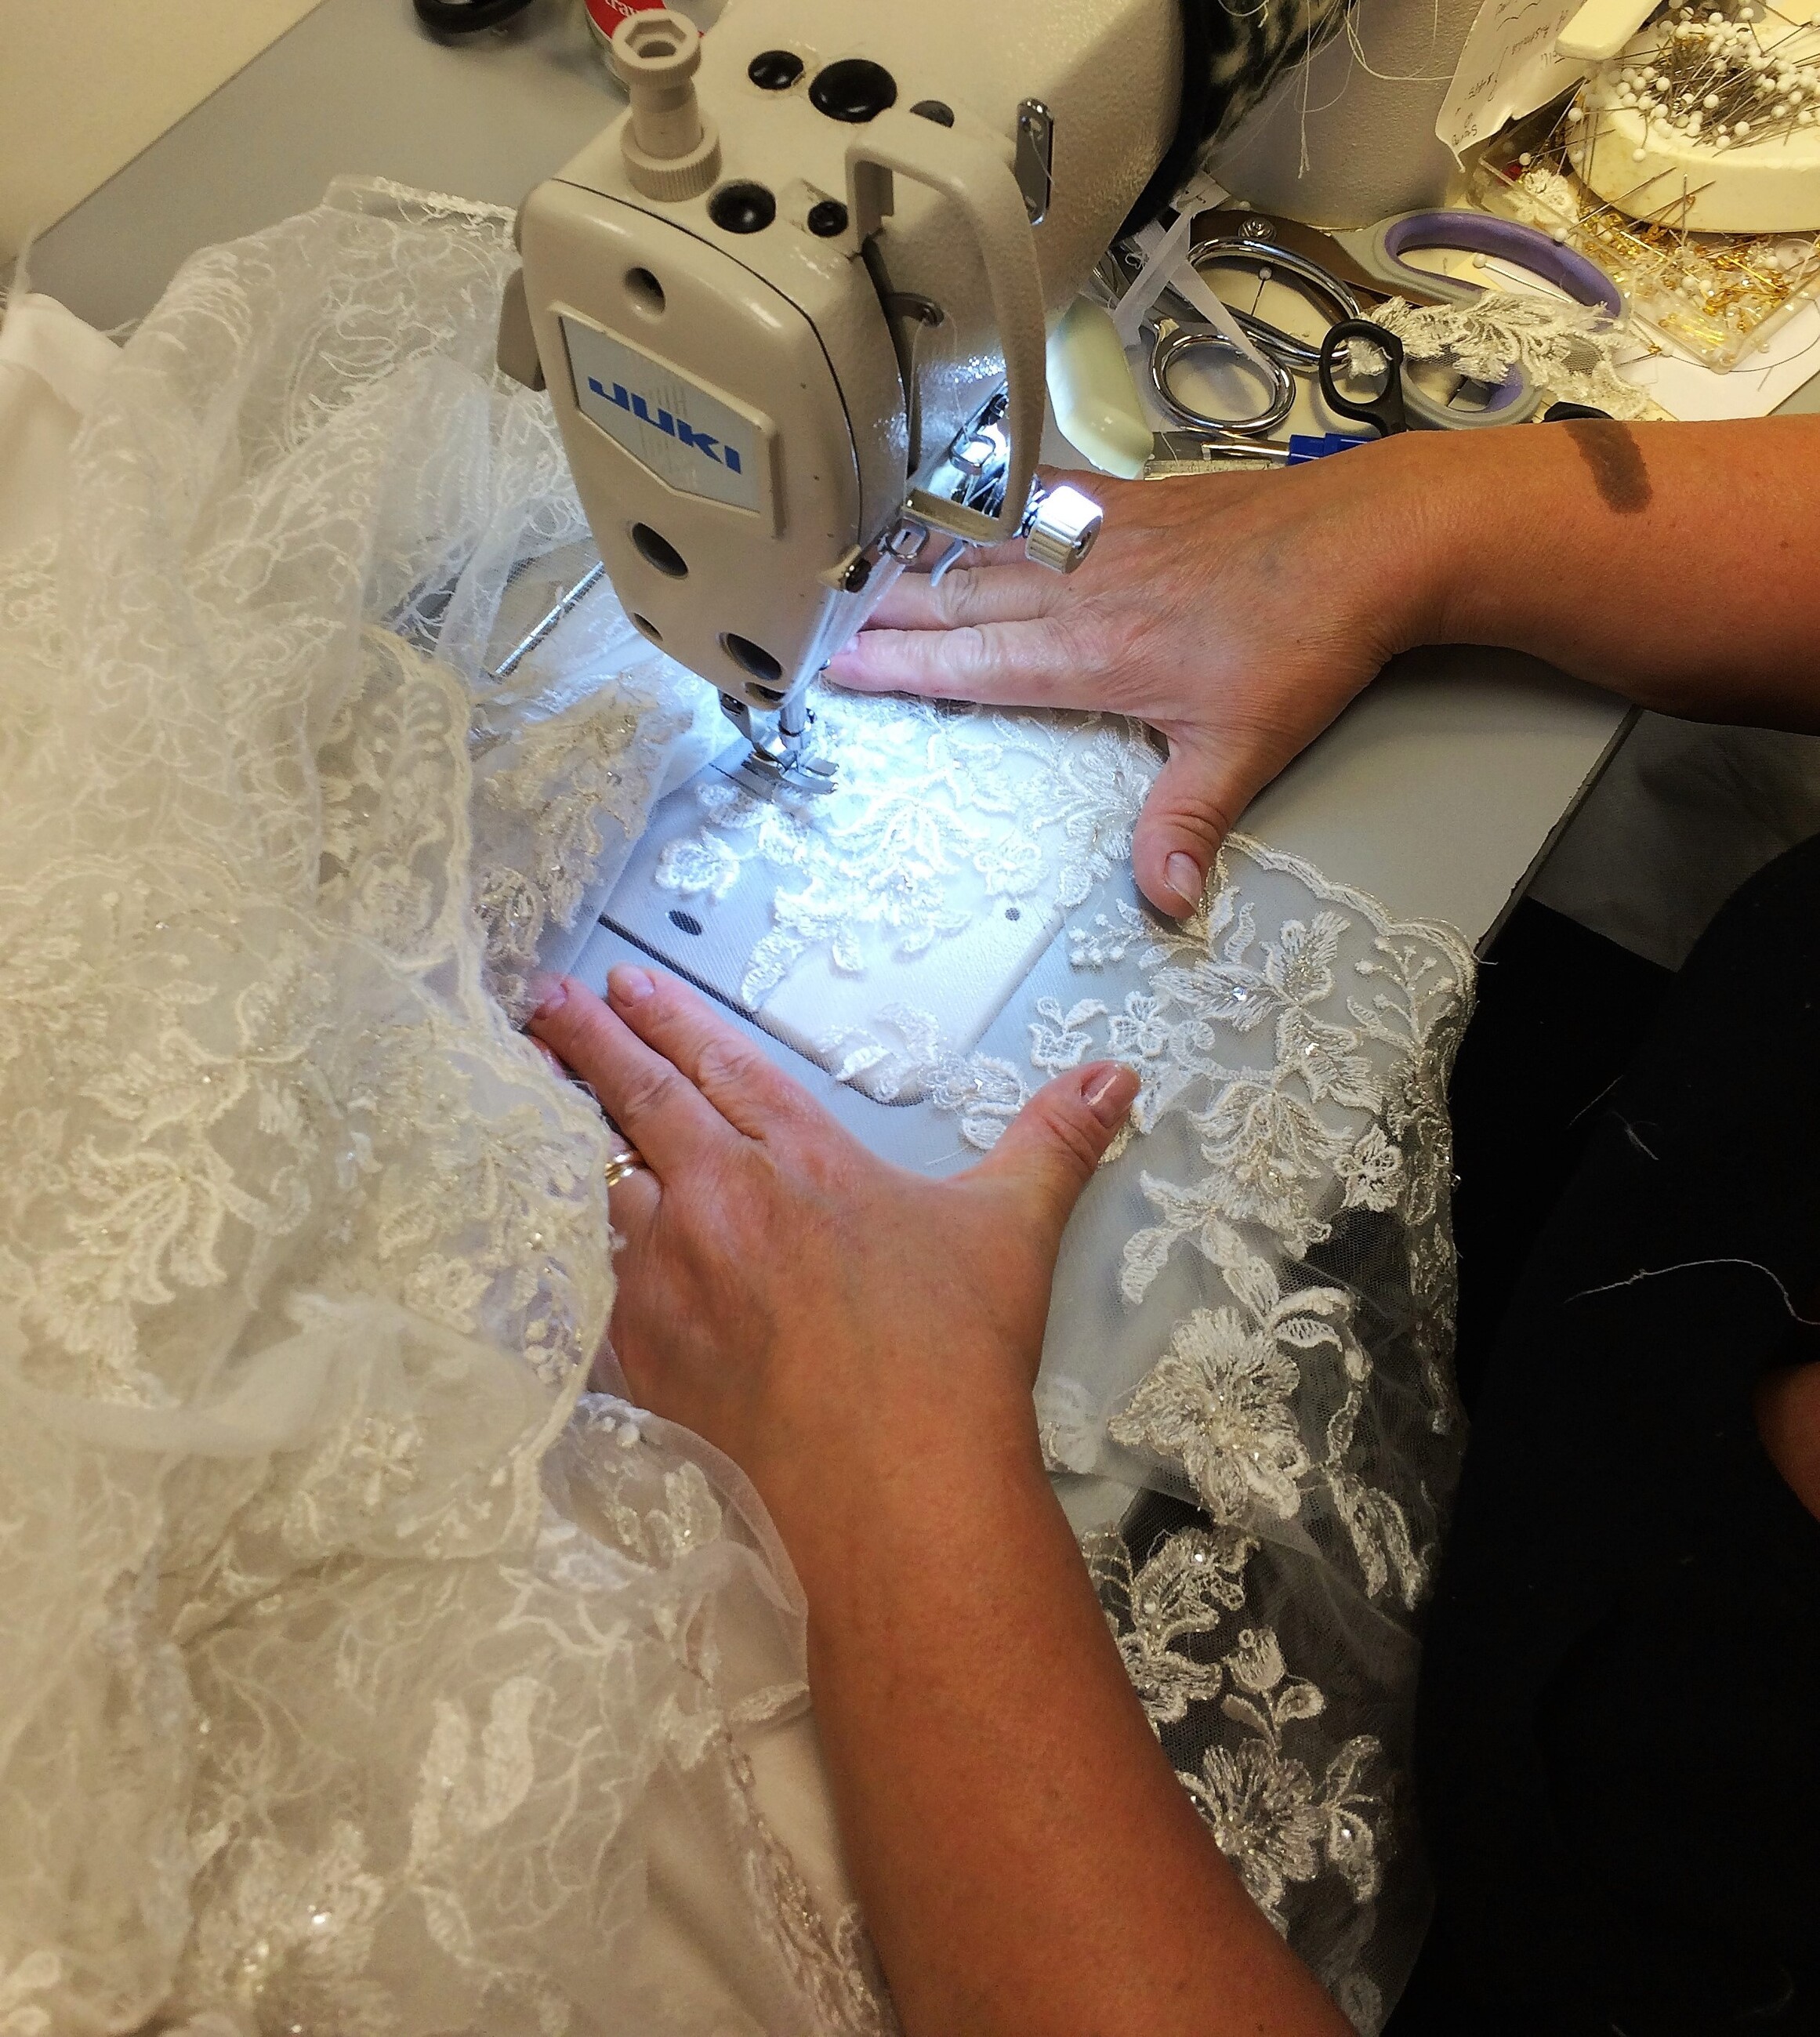 Wedding Dress Alterations: What You Need To Know. Desktop Image